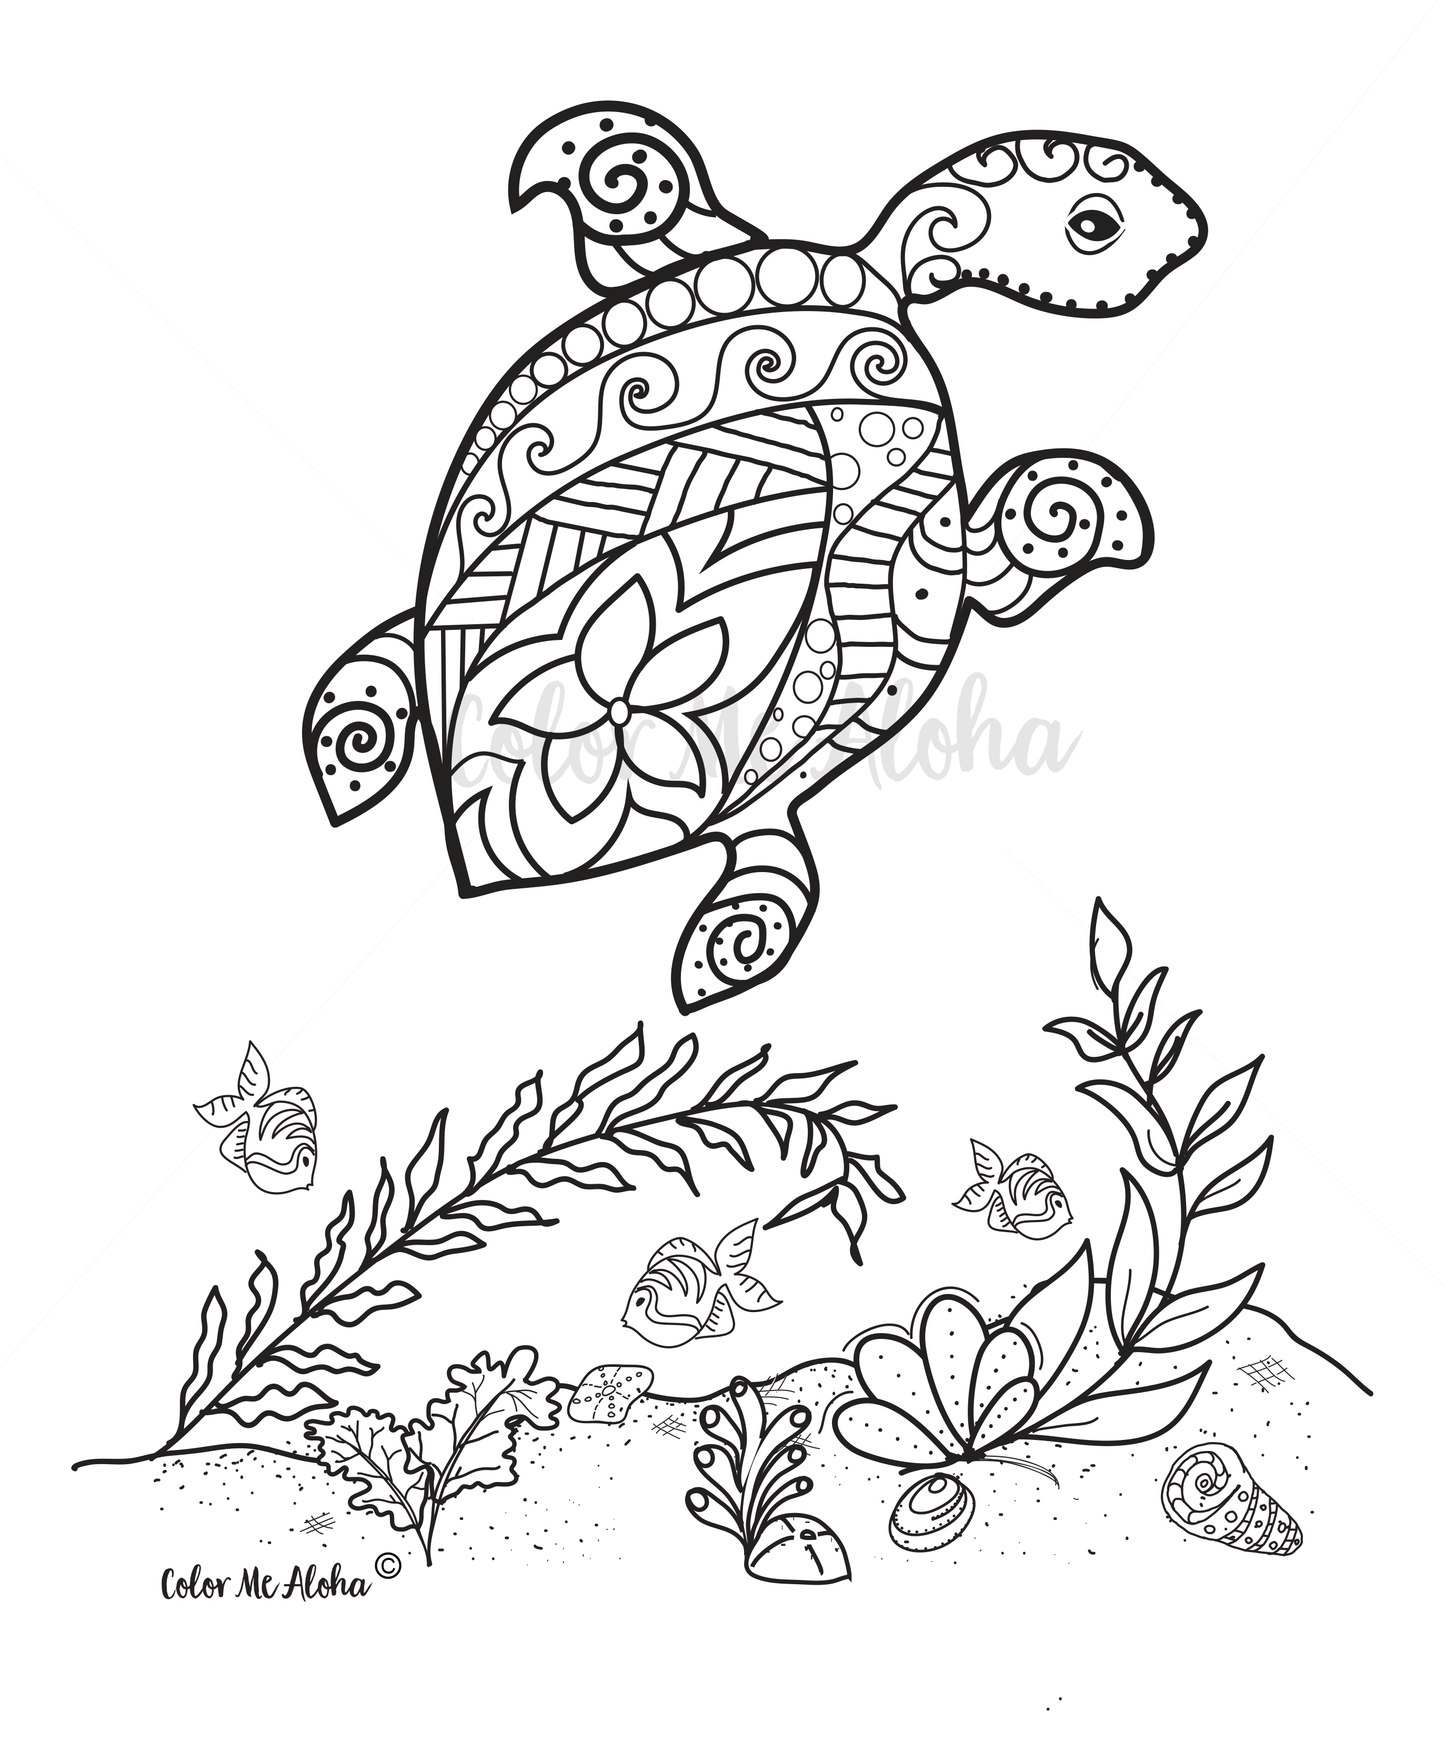 Coloring Page of Sea Turtle